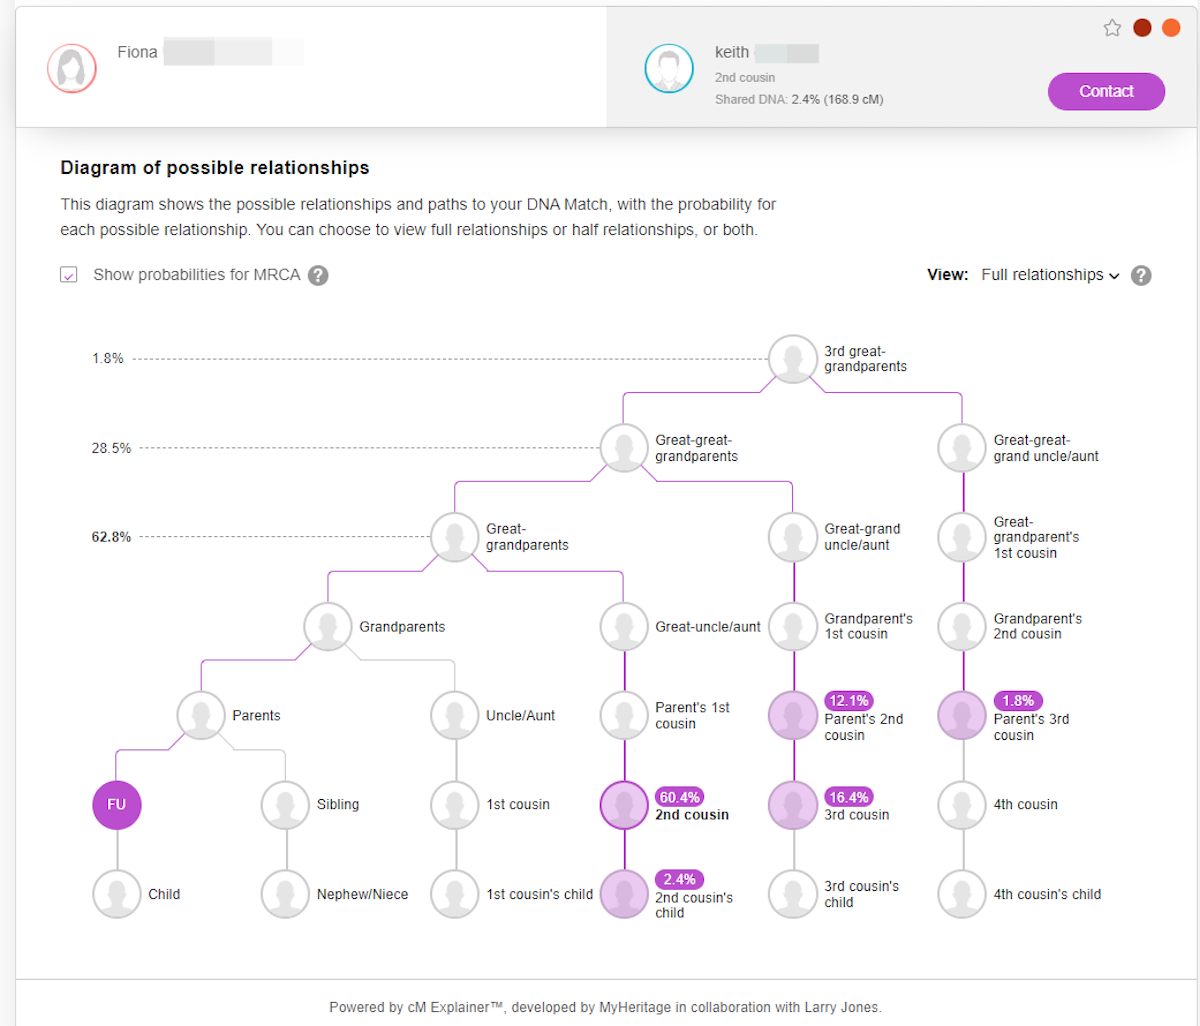 Scroll down and you will see a Diagram of possible relationships and just like before you can also see the probabilities of who are your most recent common ancestors are.